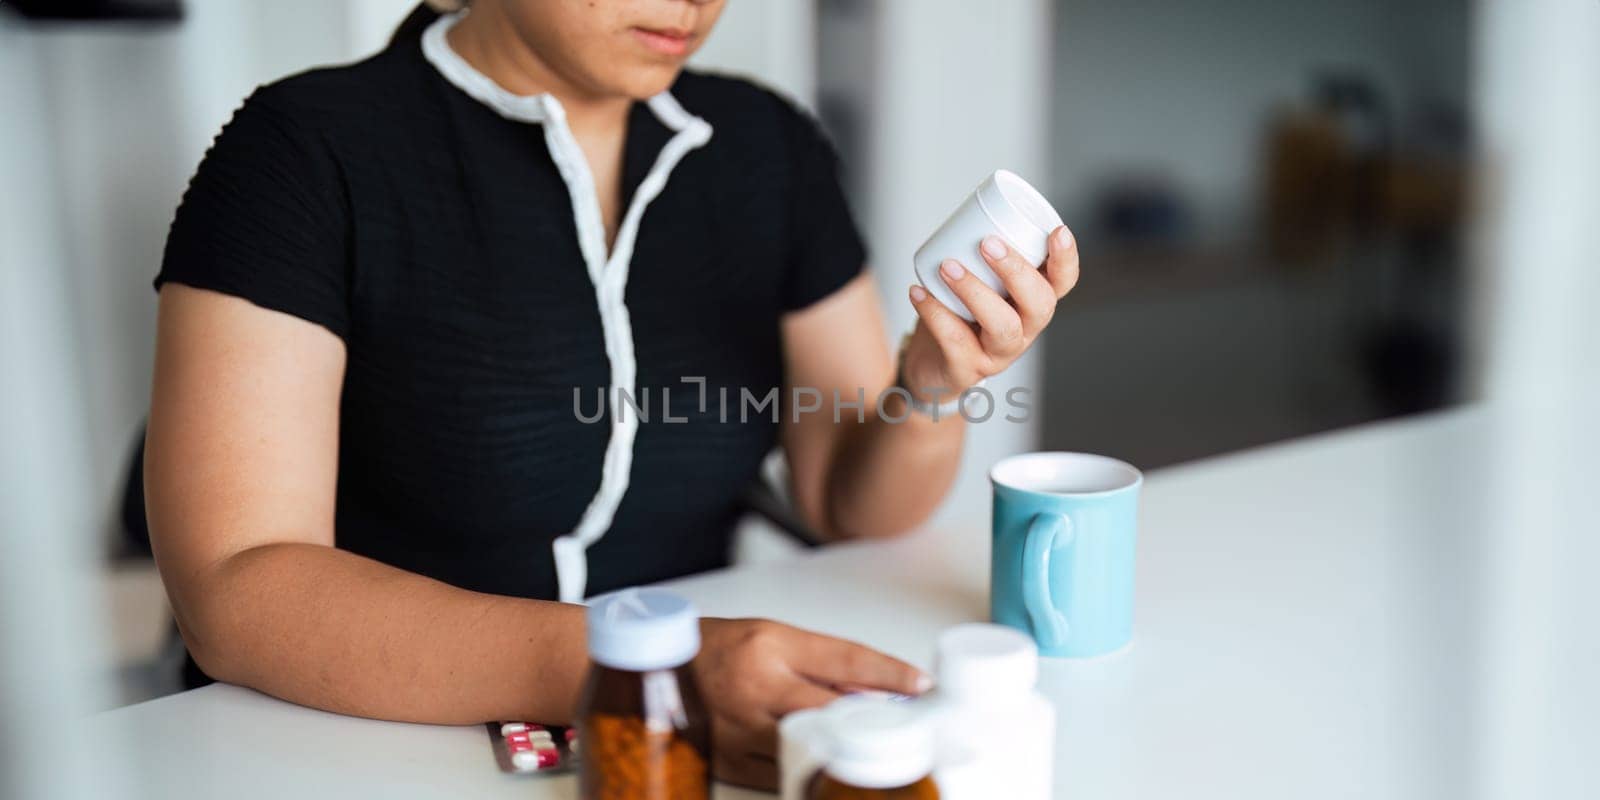 Woman hold bottle of drug tablet painkiller or vitamin supplement reading label ready to organizing medicine at home. medication healthcare concept by nateemee